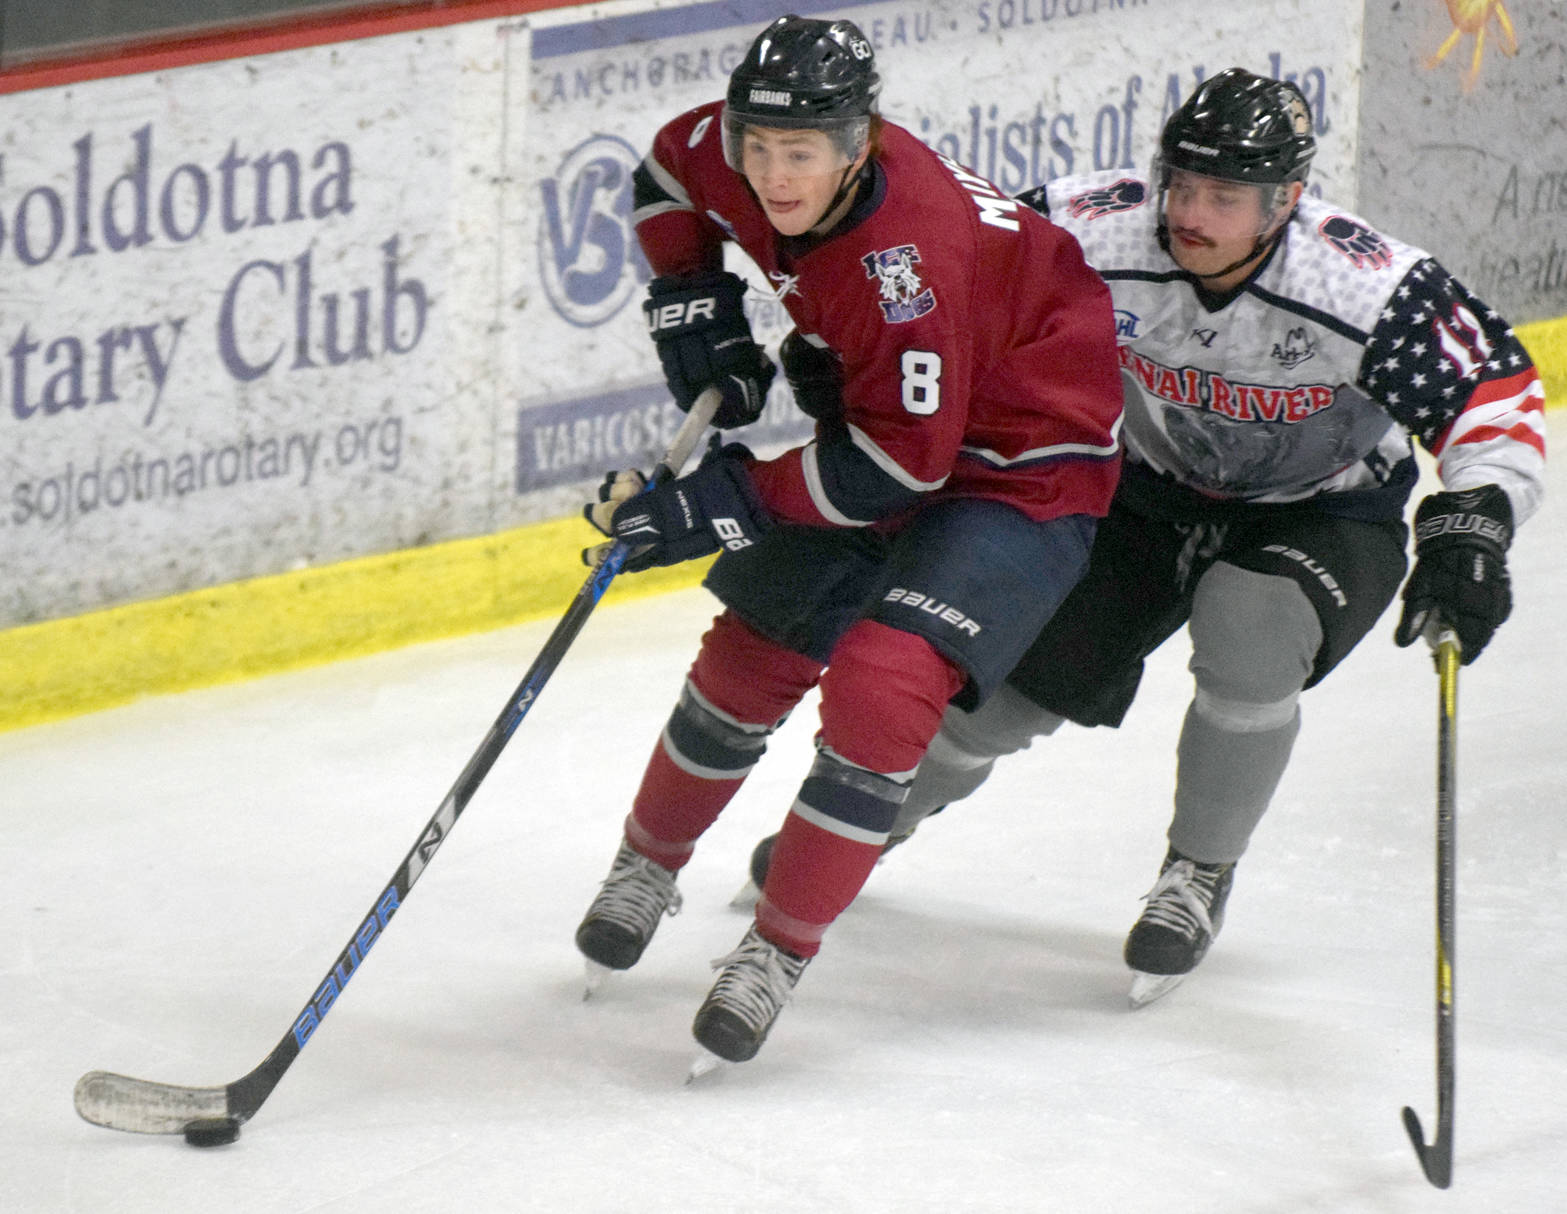 Ice Dogs lose 4-0 to Black Bears, Ice Dogs